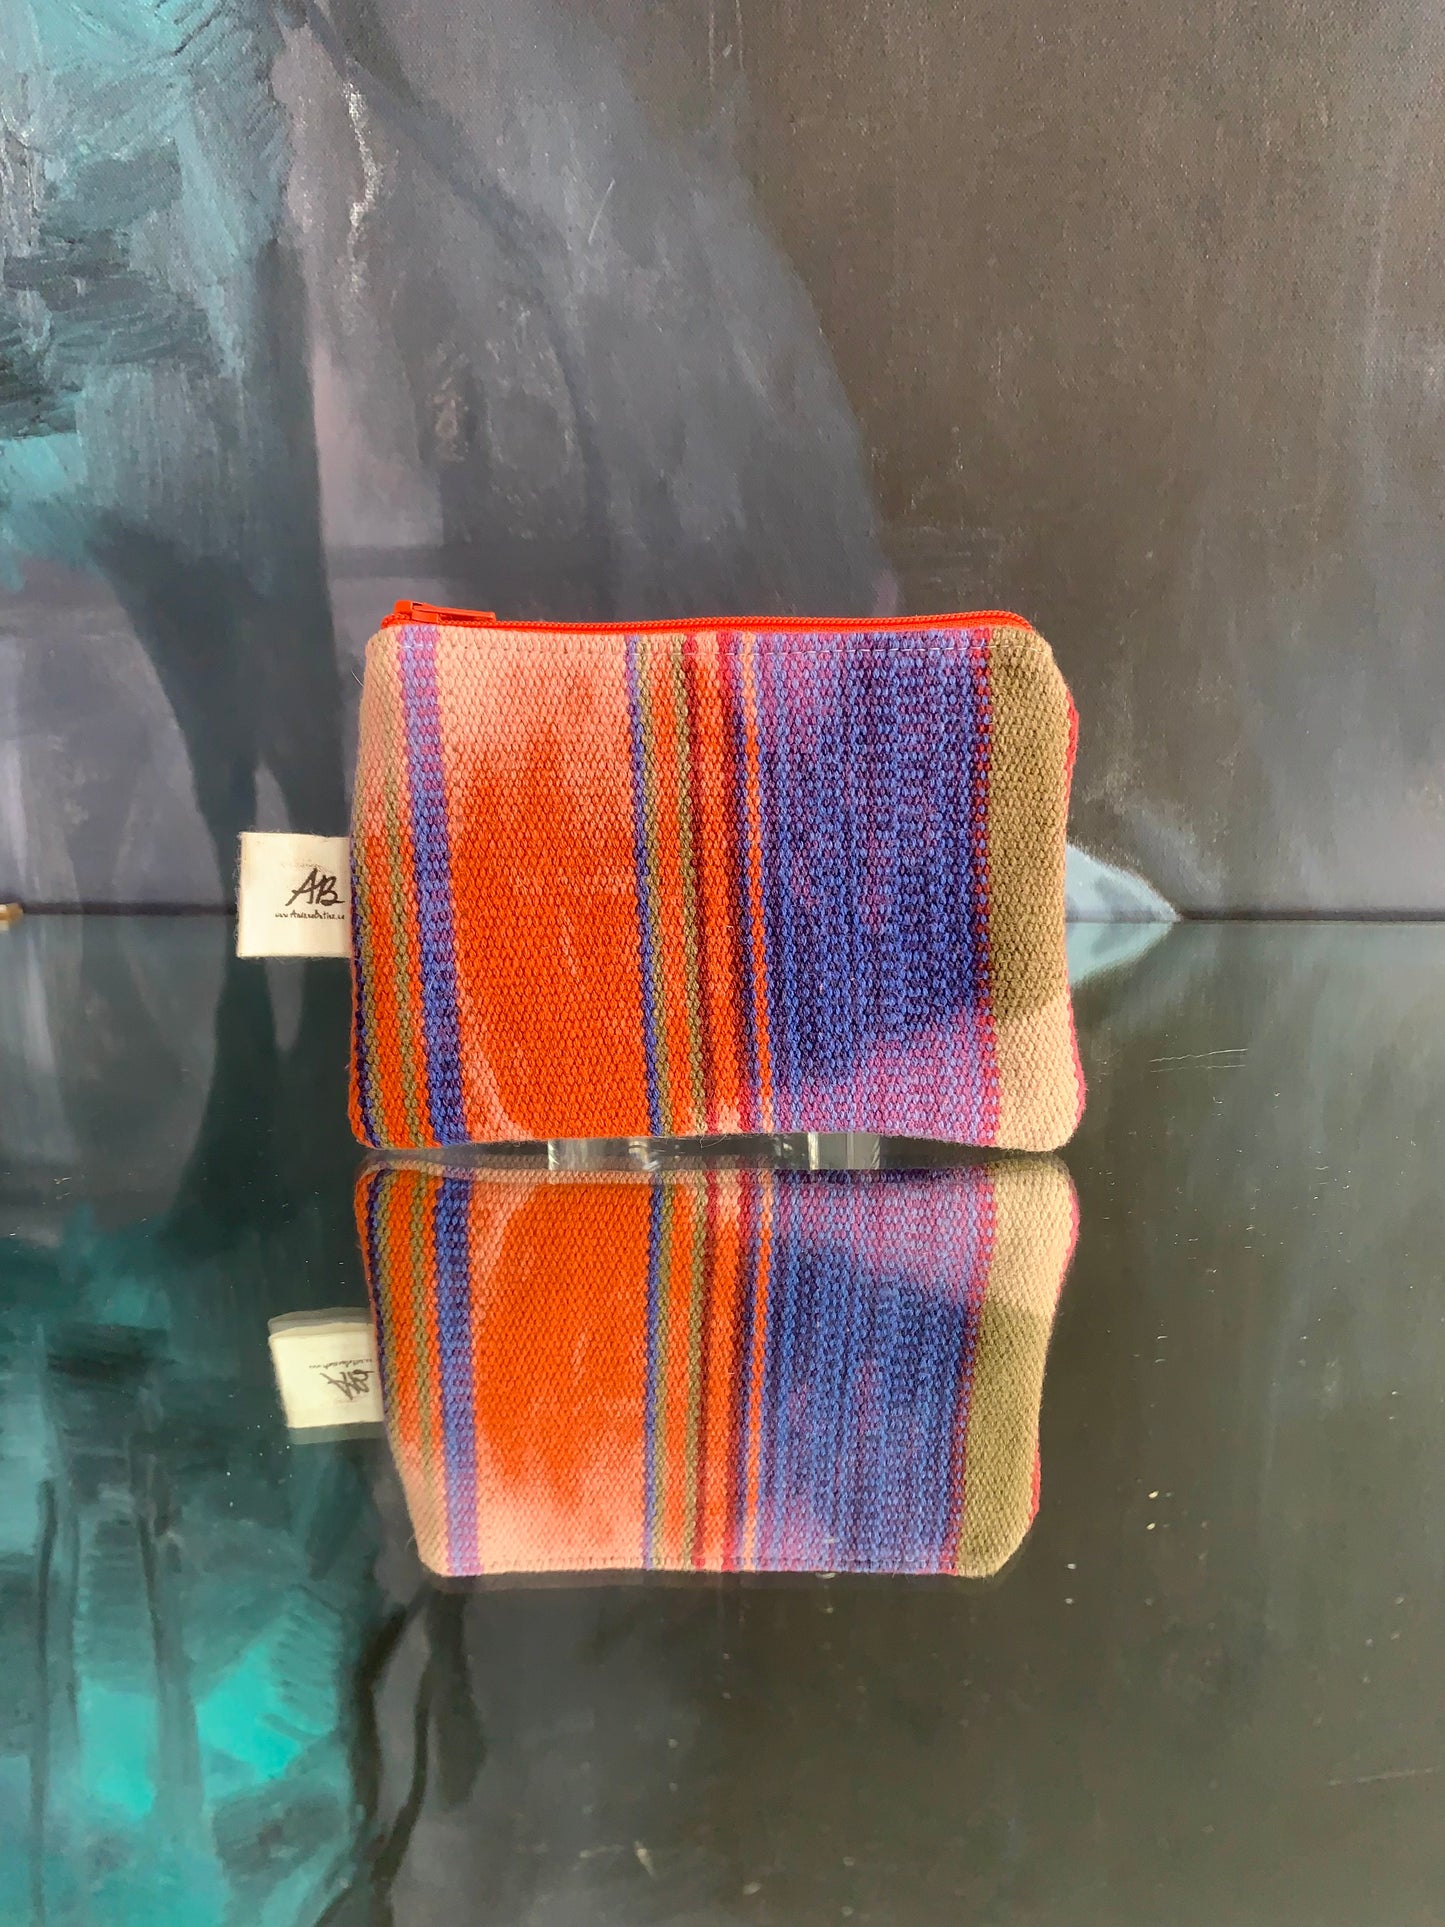 Portable pocket: square zipper pouch, over-dyed stripes